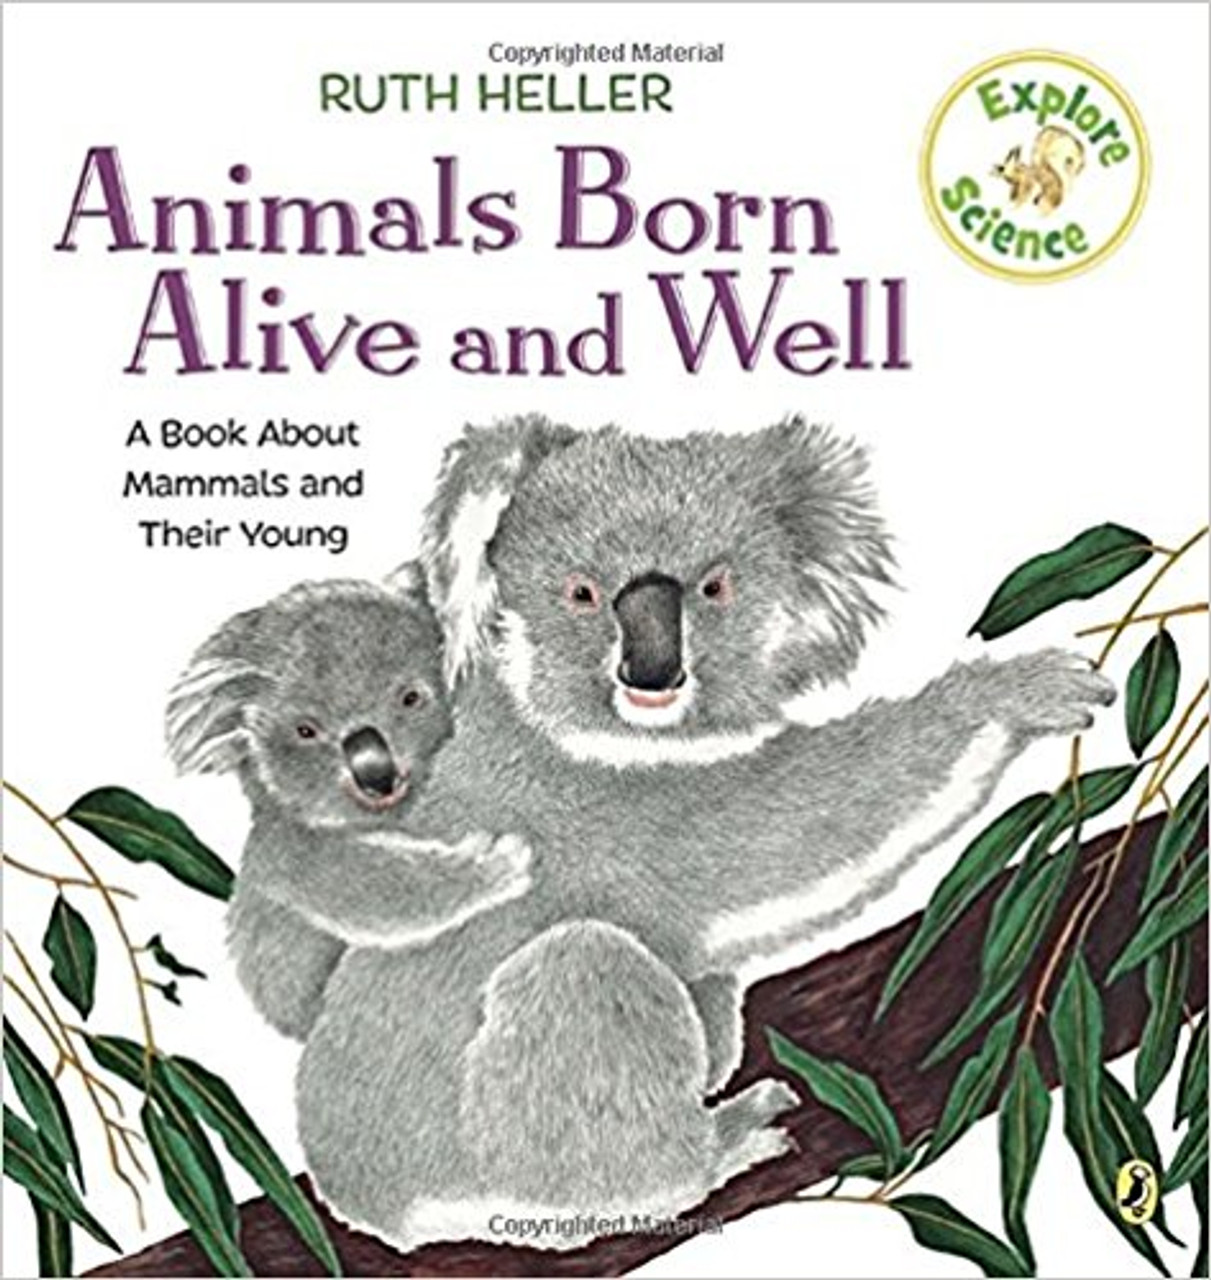 Ruth Heller's distinctive, engaging verse and striking illustrations of more than 80 clearly labeled species make this book a wonderful introduction to mammals. From the largest whale to the smallest shrew, here is a wealth of information and a source of pleasure for any nature lover.